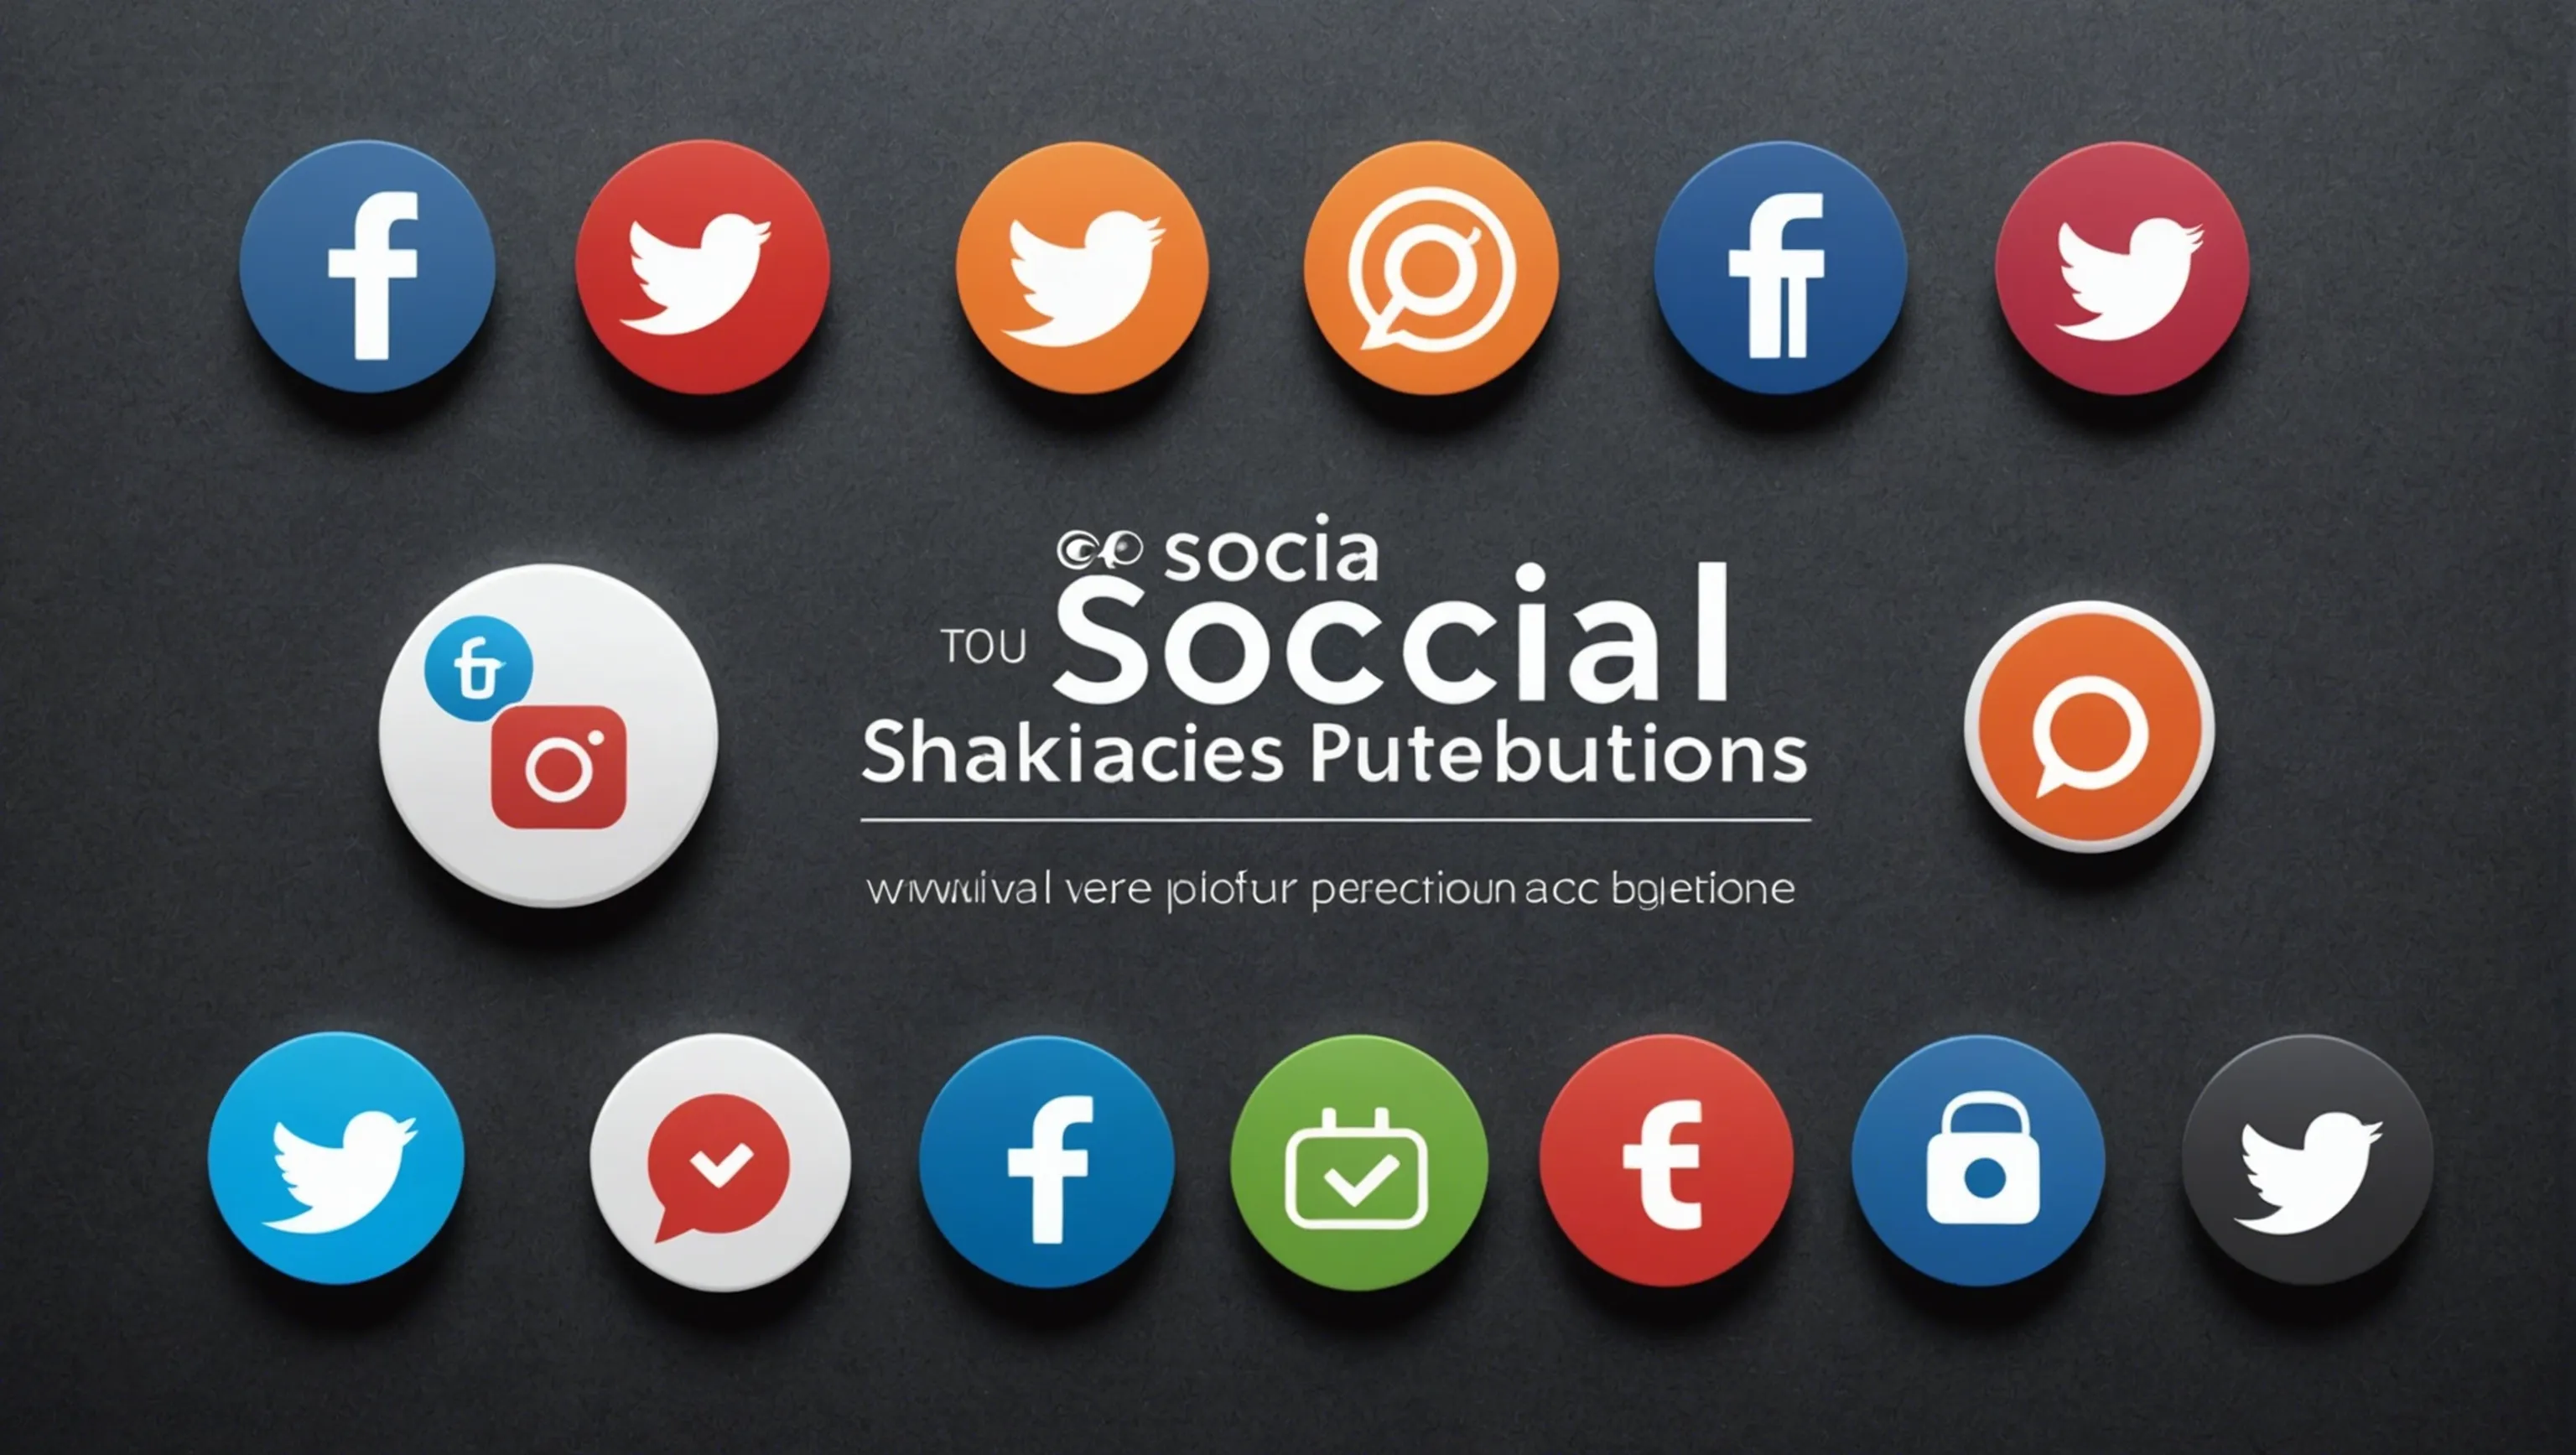 Social media sharing buttons for marketing professionals